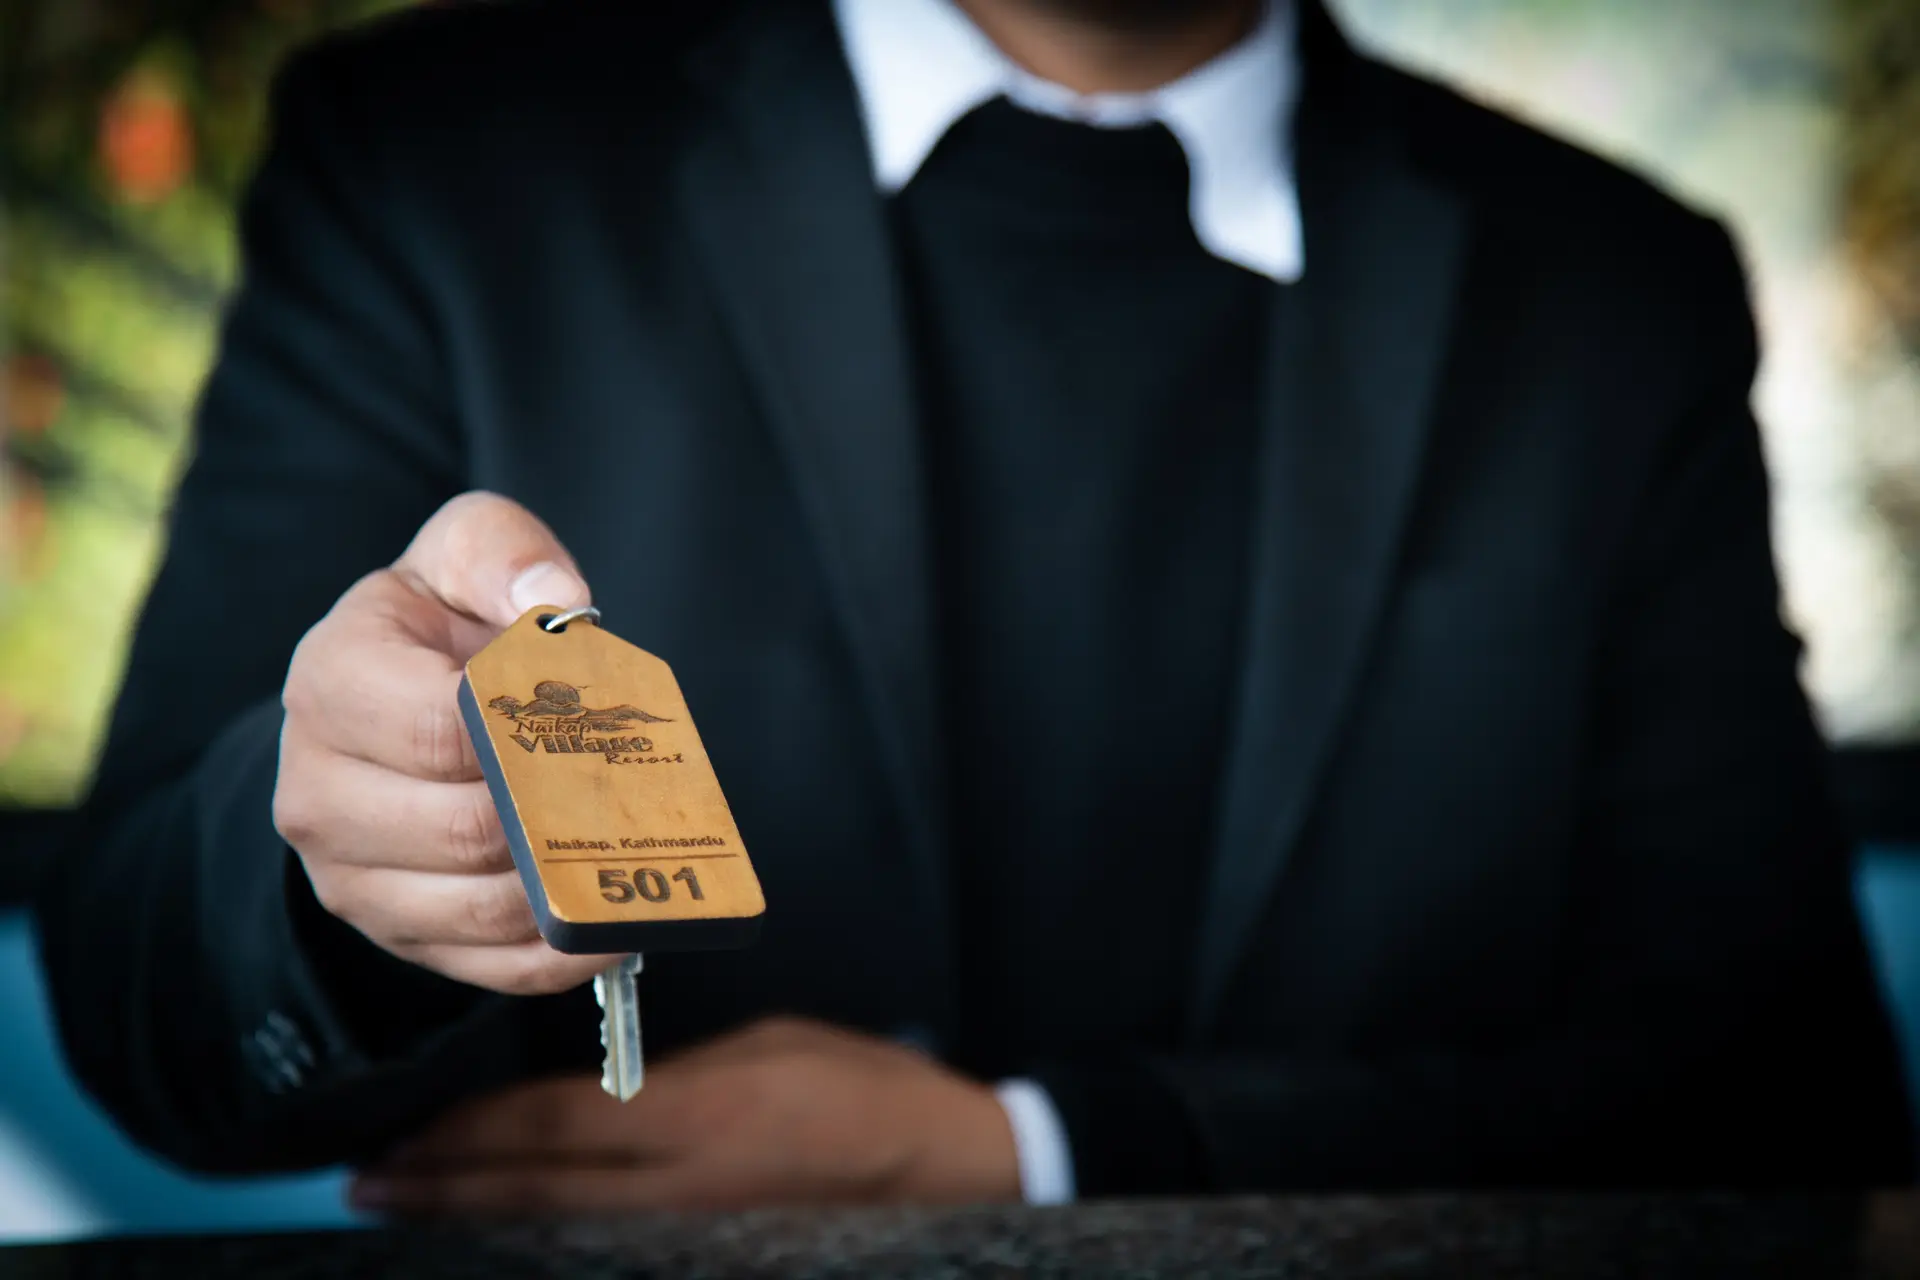 A person holding a key ring with logo